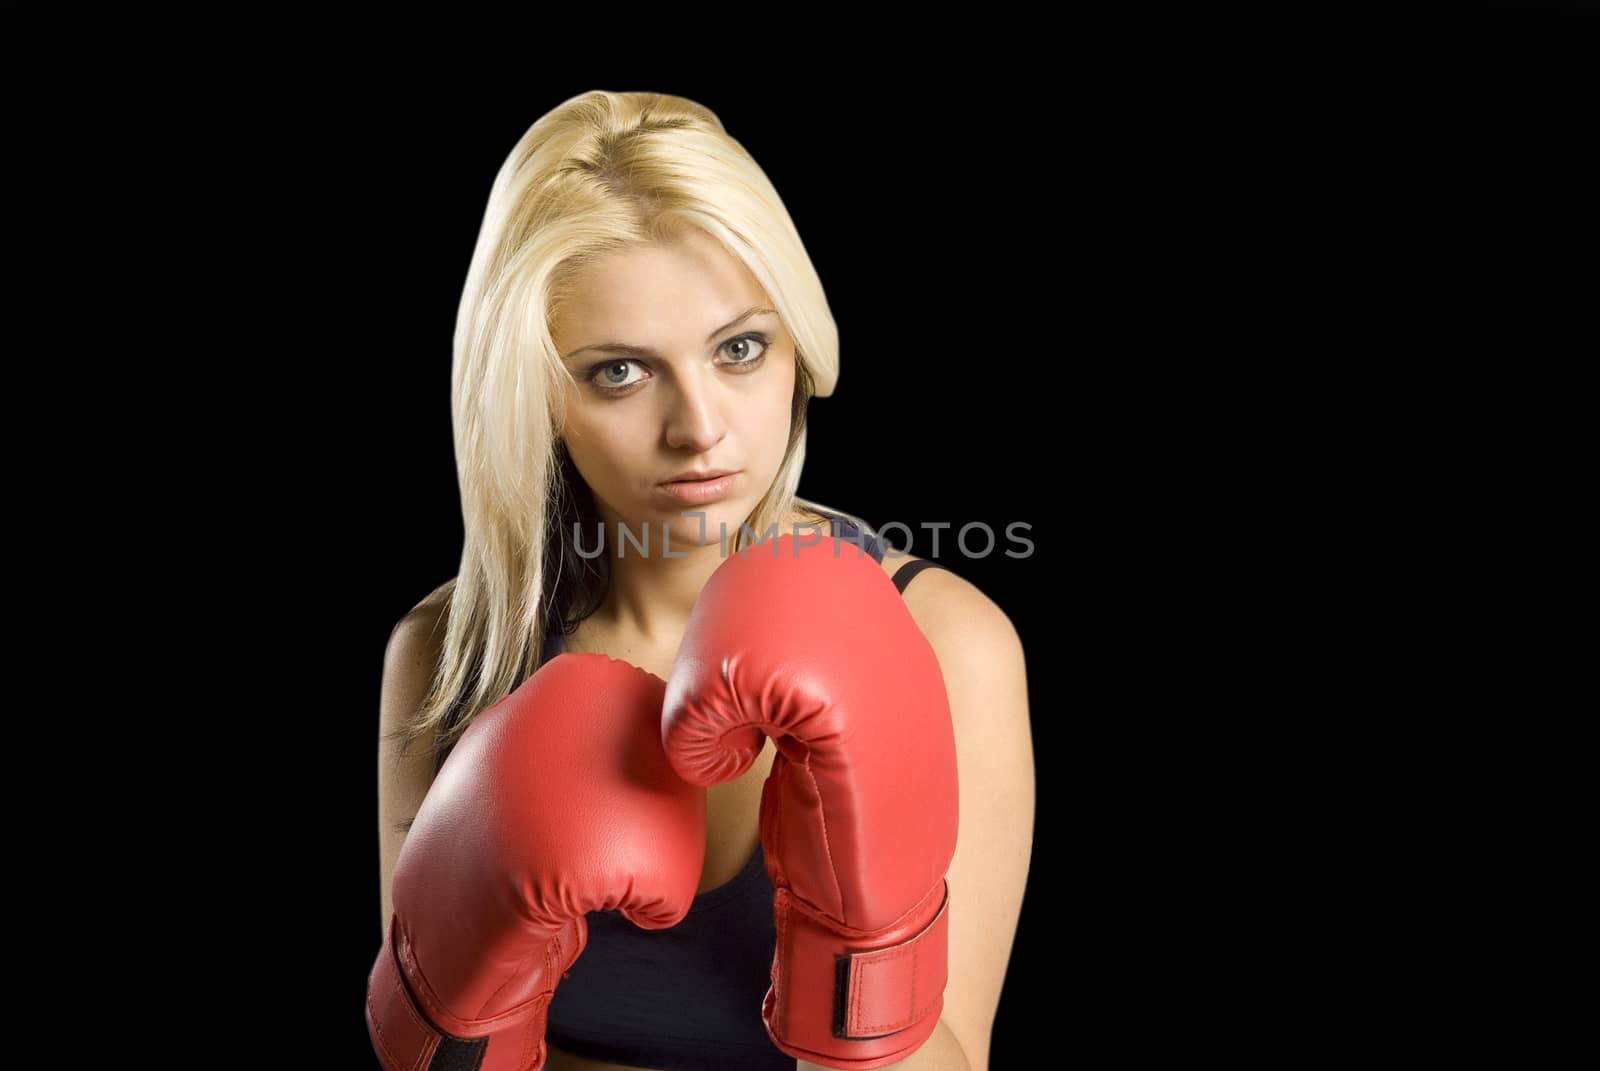 Beautiful young woman training with boxing gloves on blackboard background by alistaircotton